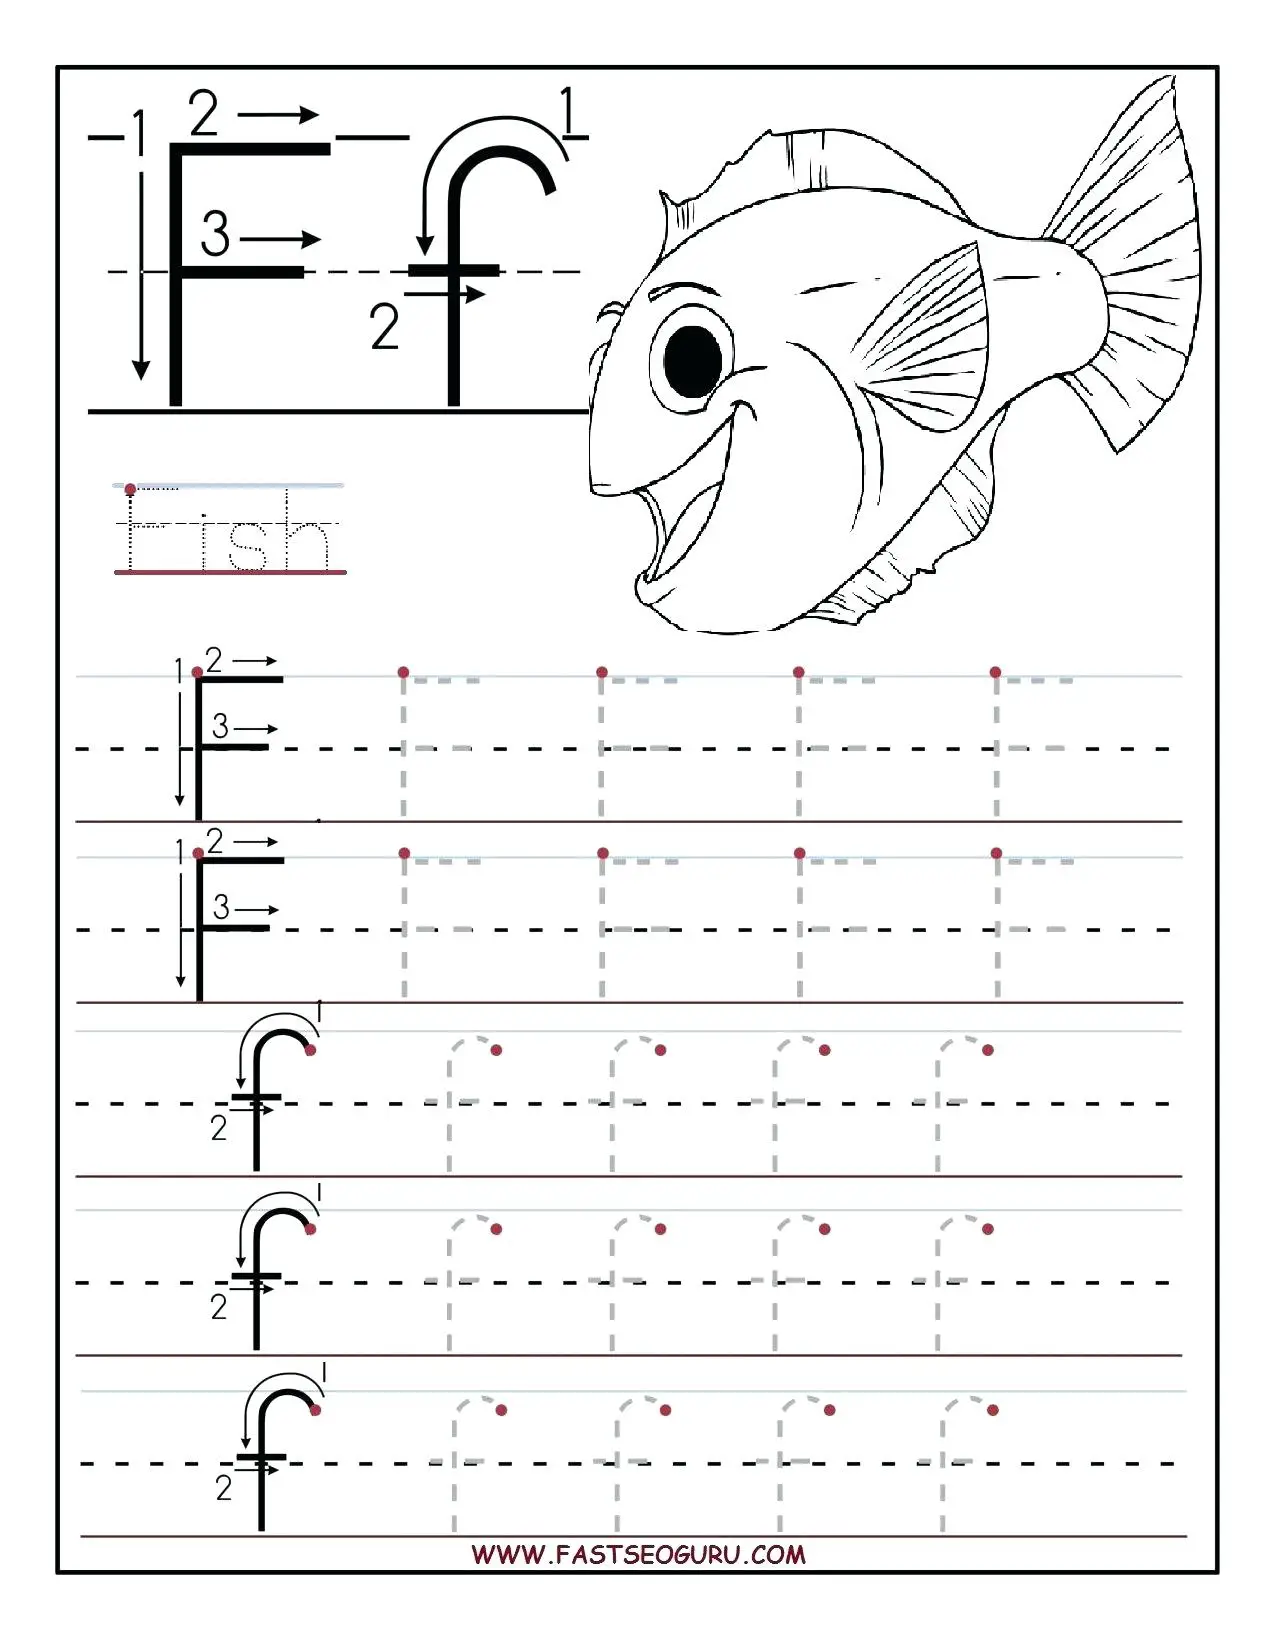 15 Useful Letter F Worksheets for Toddlers